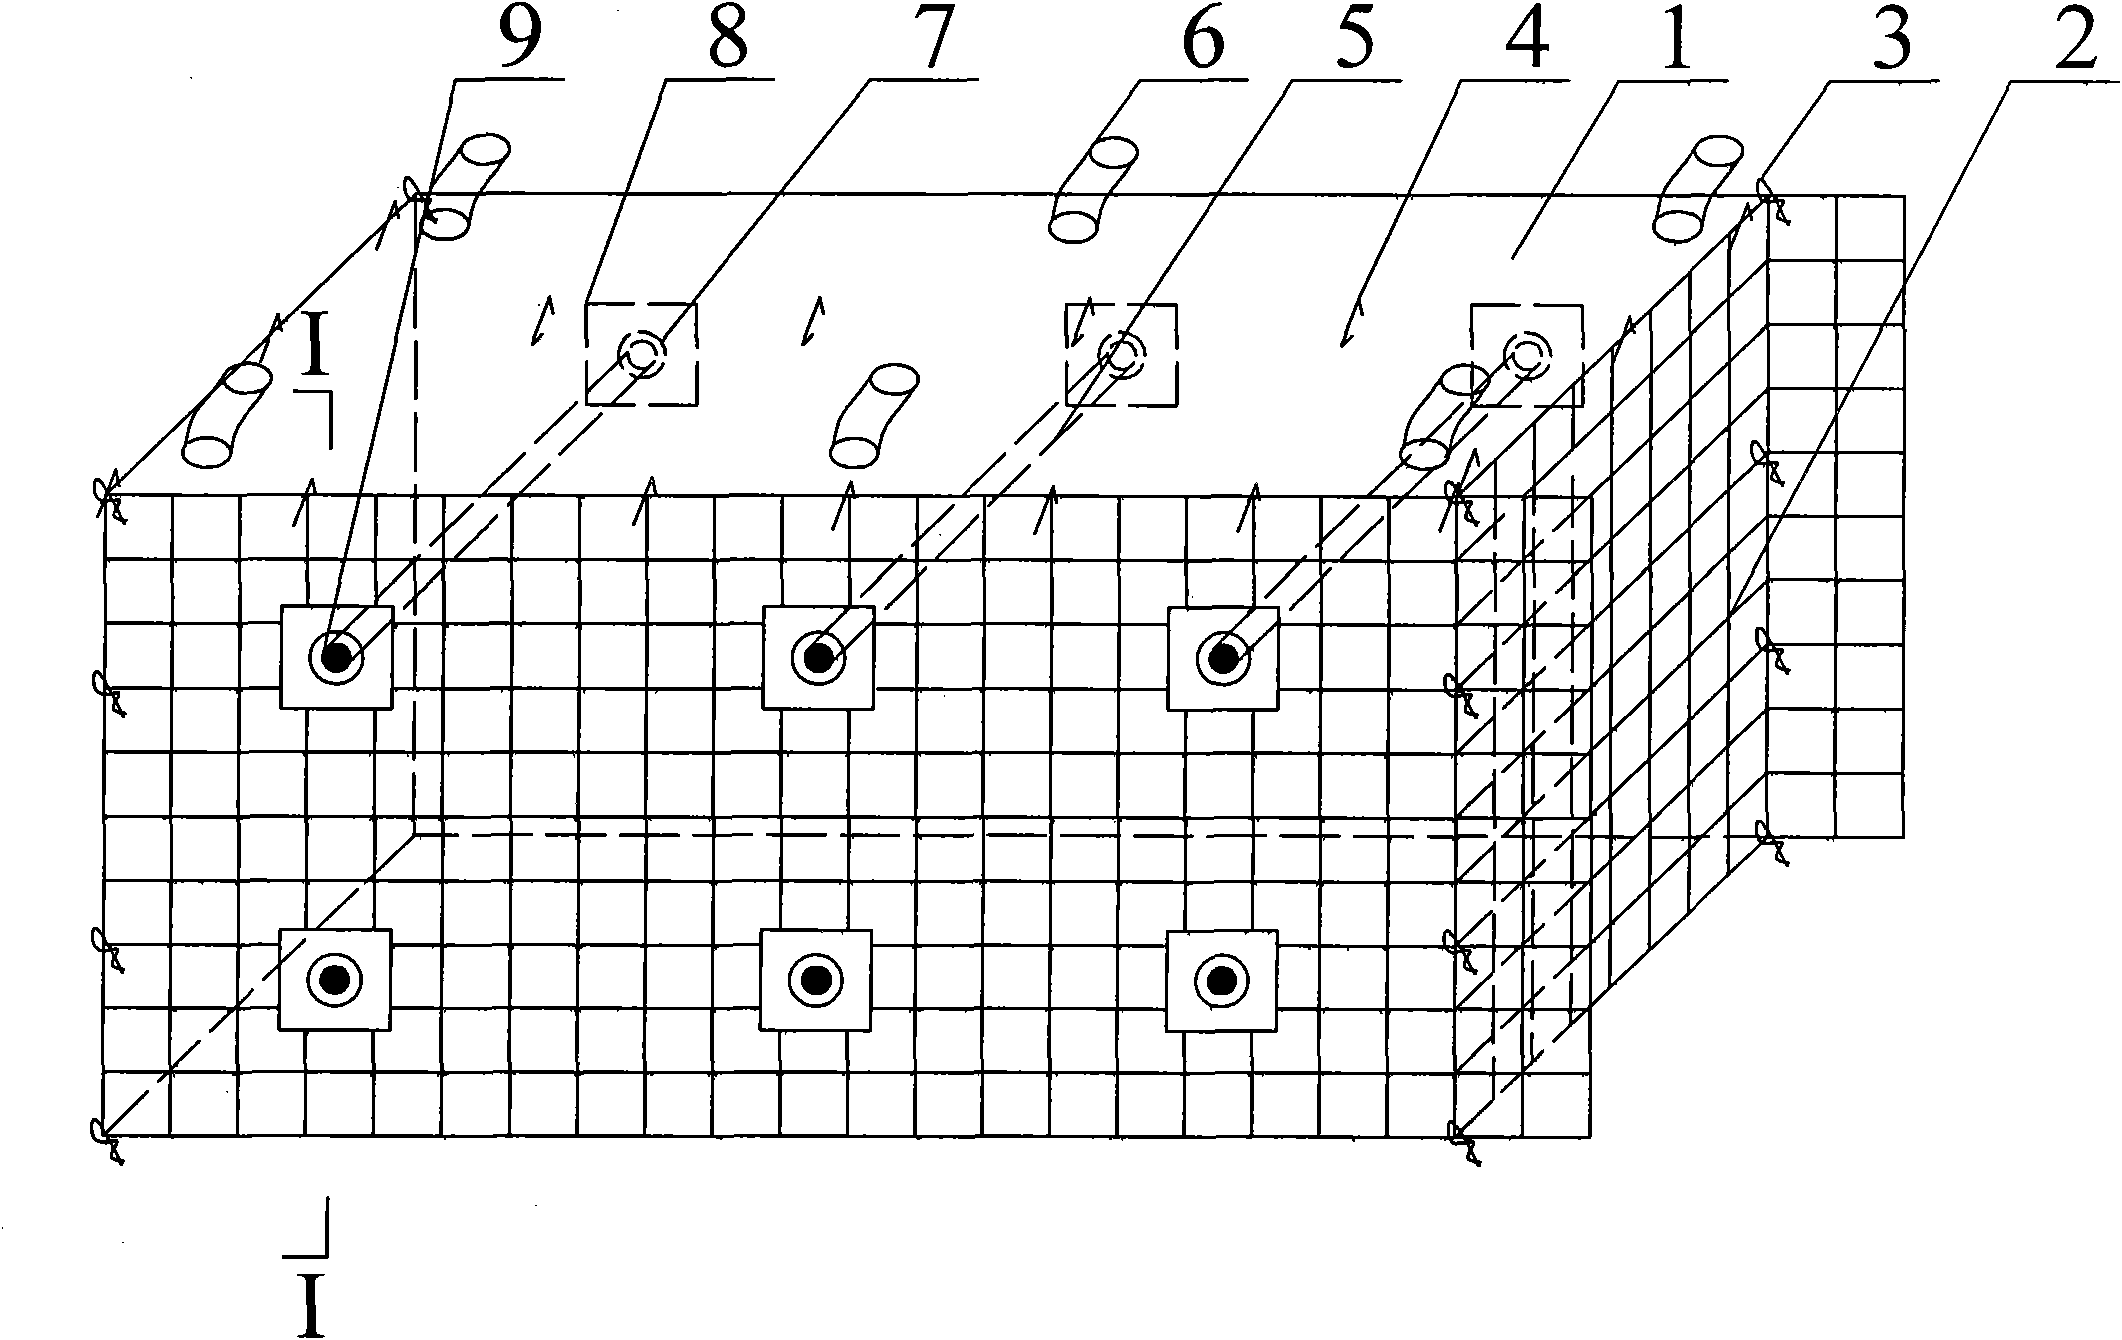 Gob-side entry retaining reinforcing filling body structure construction method